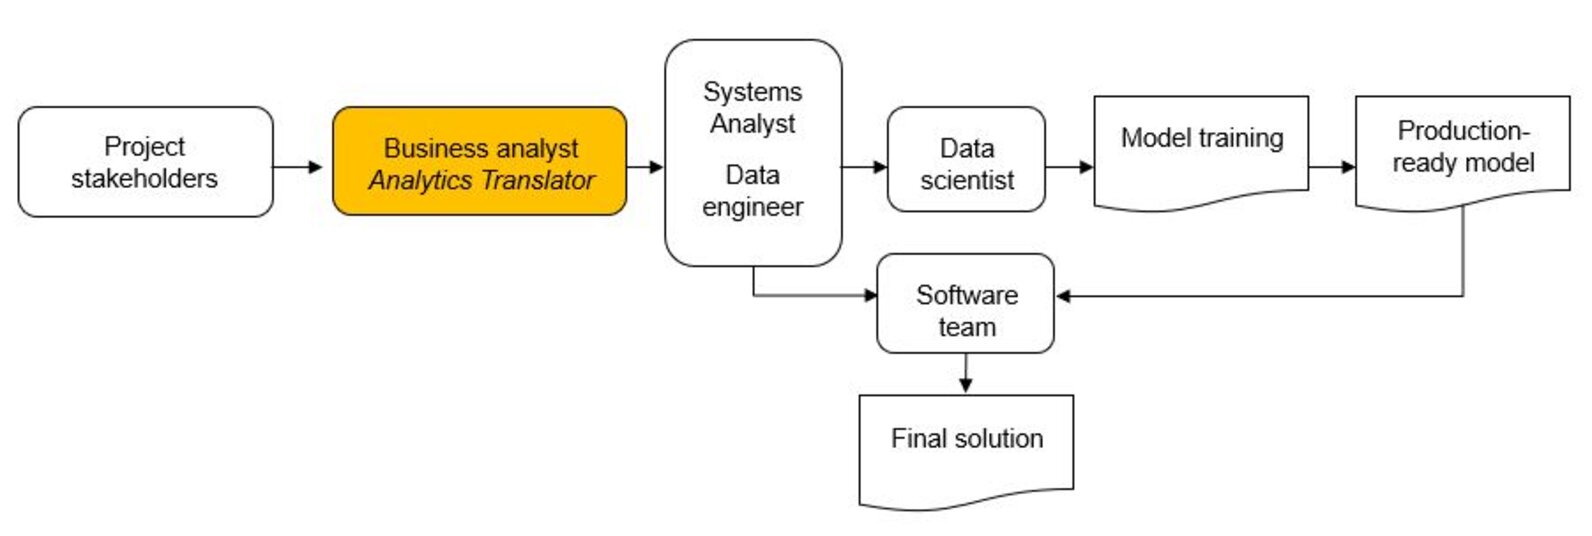 Illustration of the positioning of business analytics translators in the data science project workflow as often found in corporate environments.